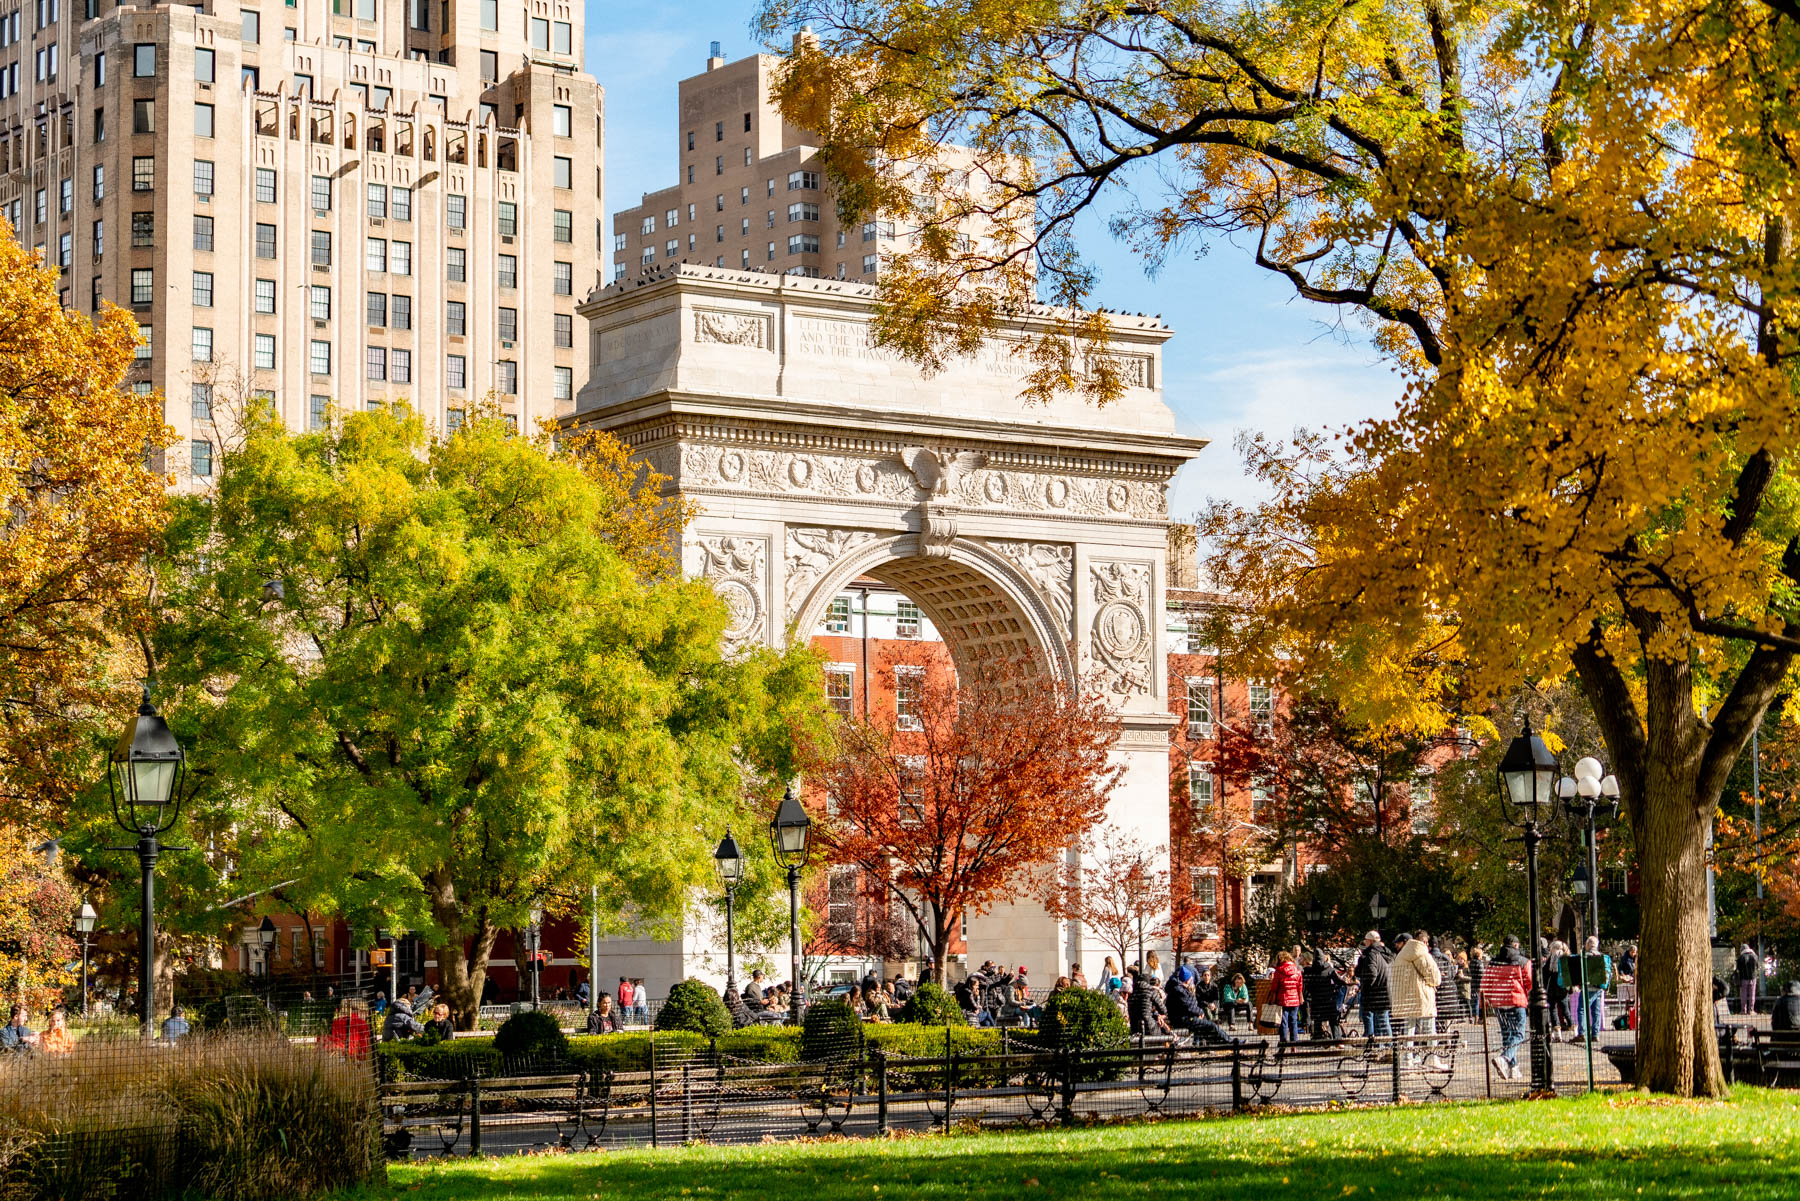 helpful tips for visiting New York City, 3 days NYC